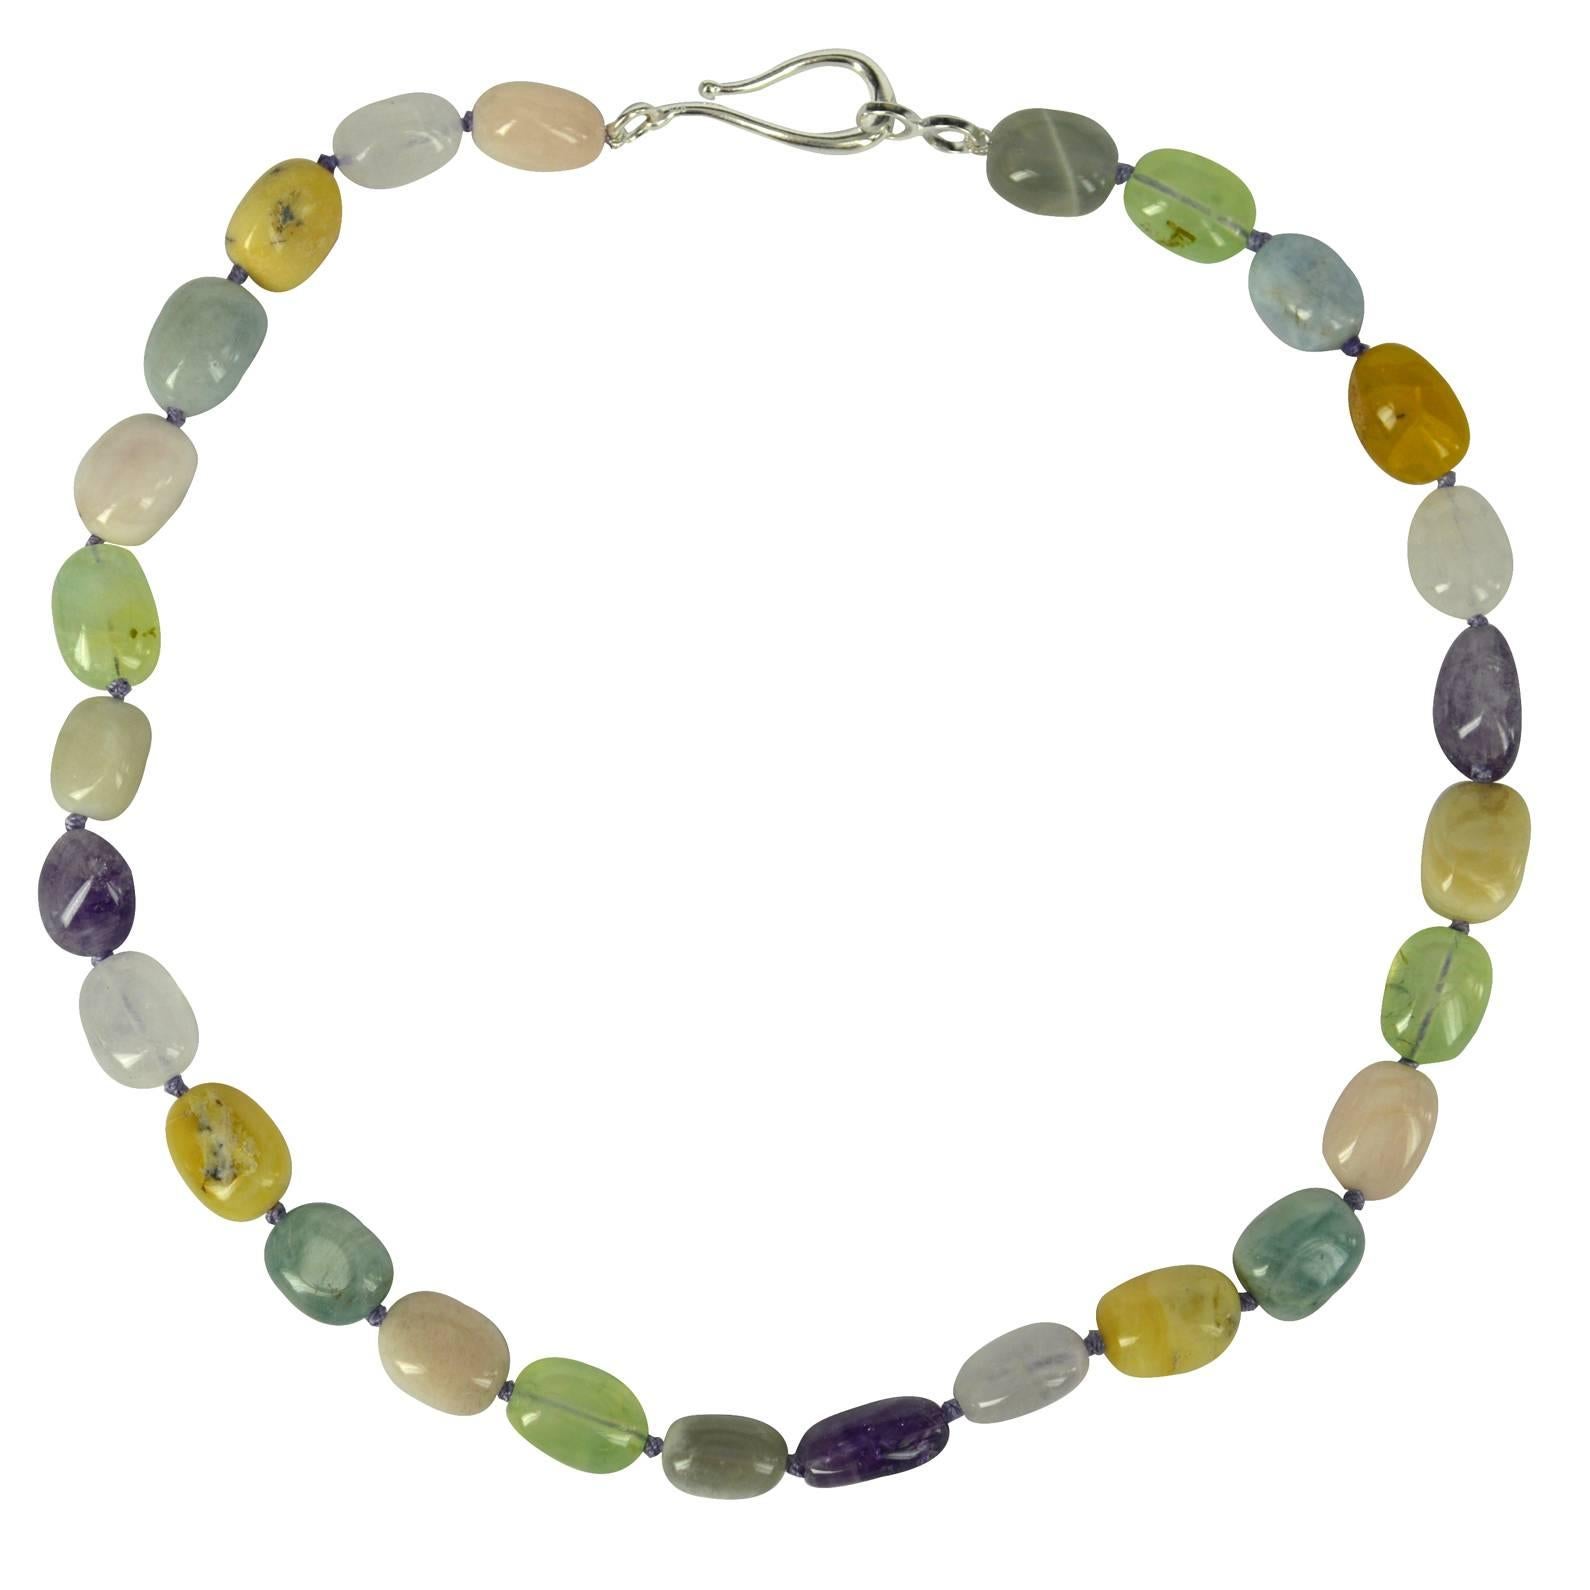 Aquamarine, Amethyst, Prehnite, Opal, Morganite, Rose Quartz natural Polished Nuggets approx 15x12mm with a 40mm Sterling Silver hook Clasp, hand knotted for strength and durability.

Finished necklace measures 48cm.

Custom modification available